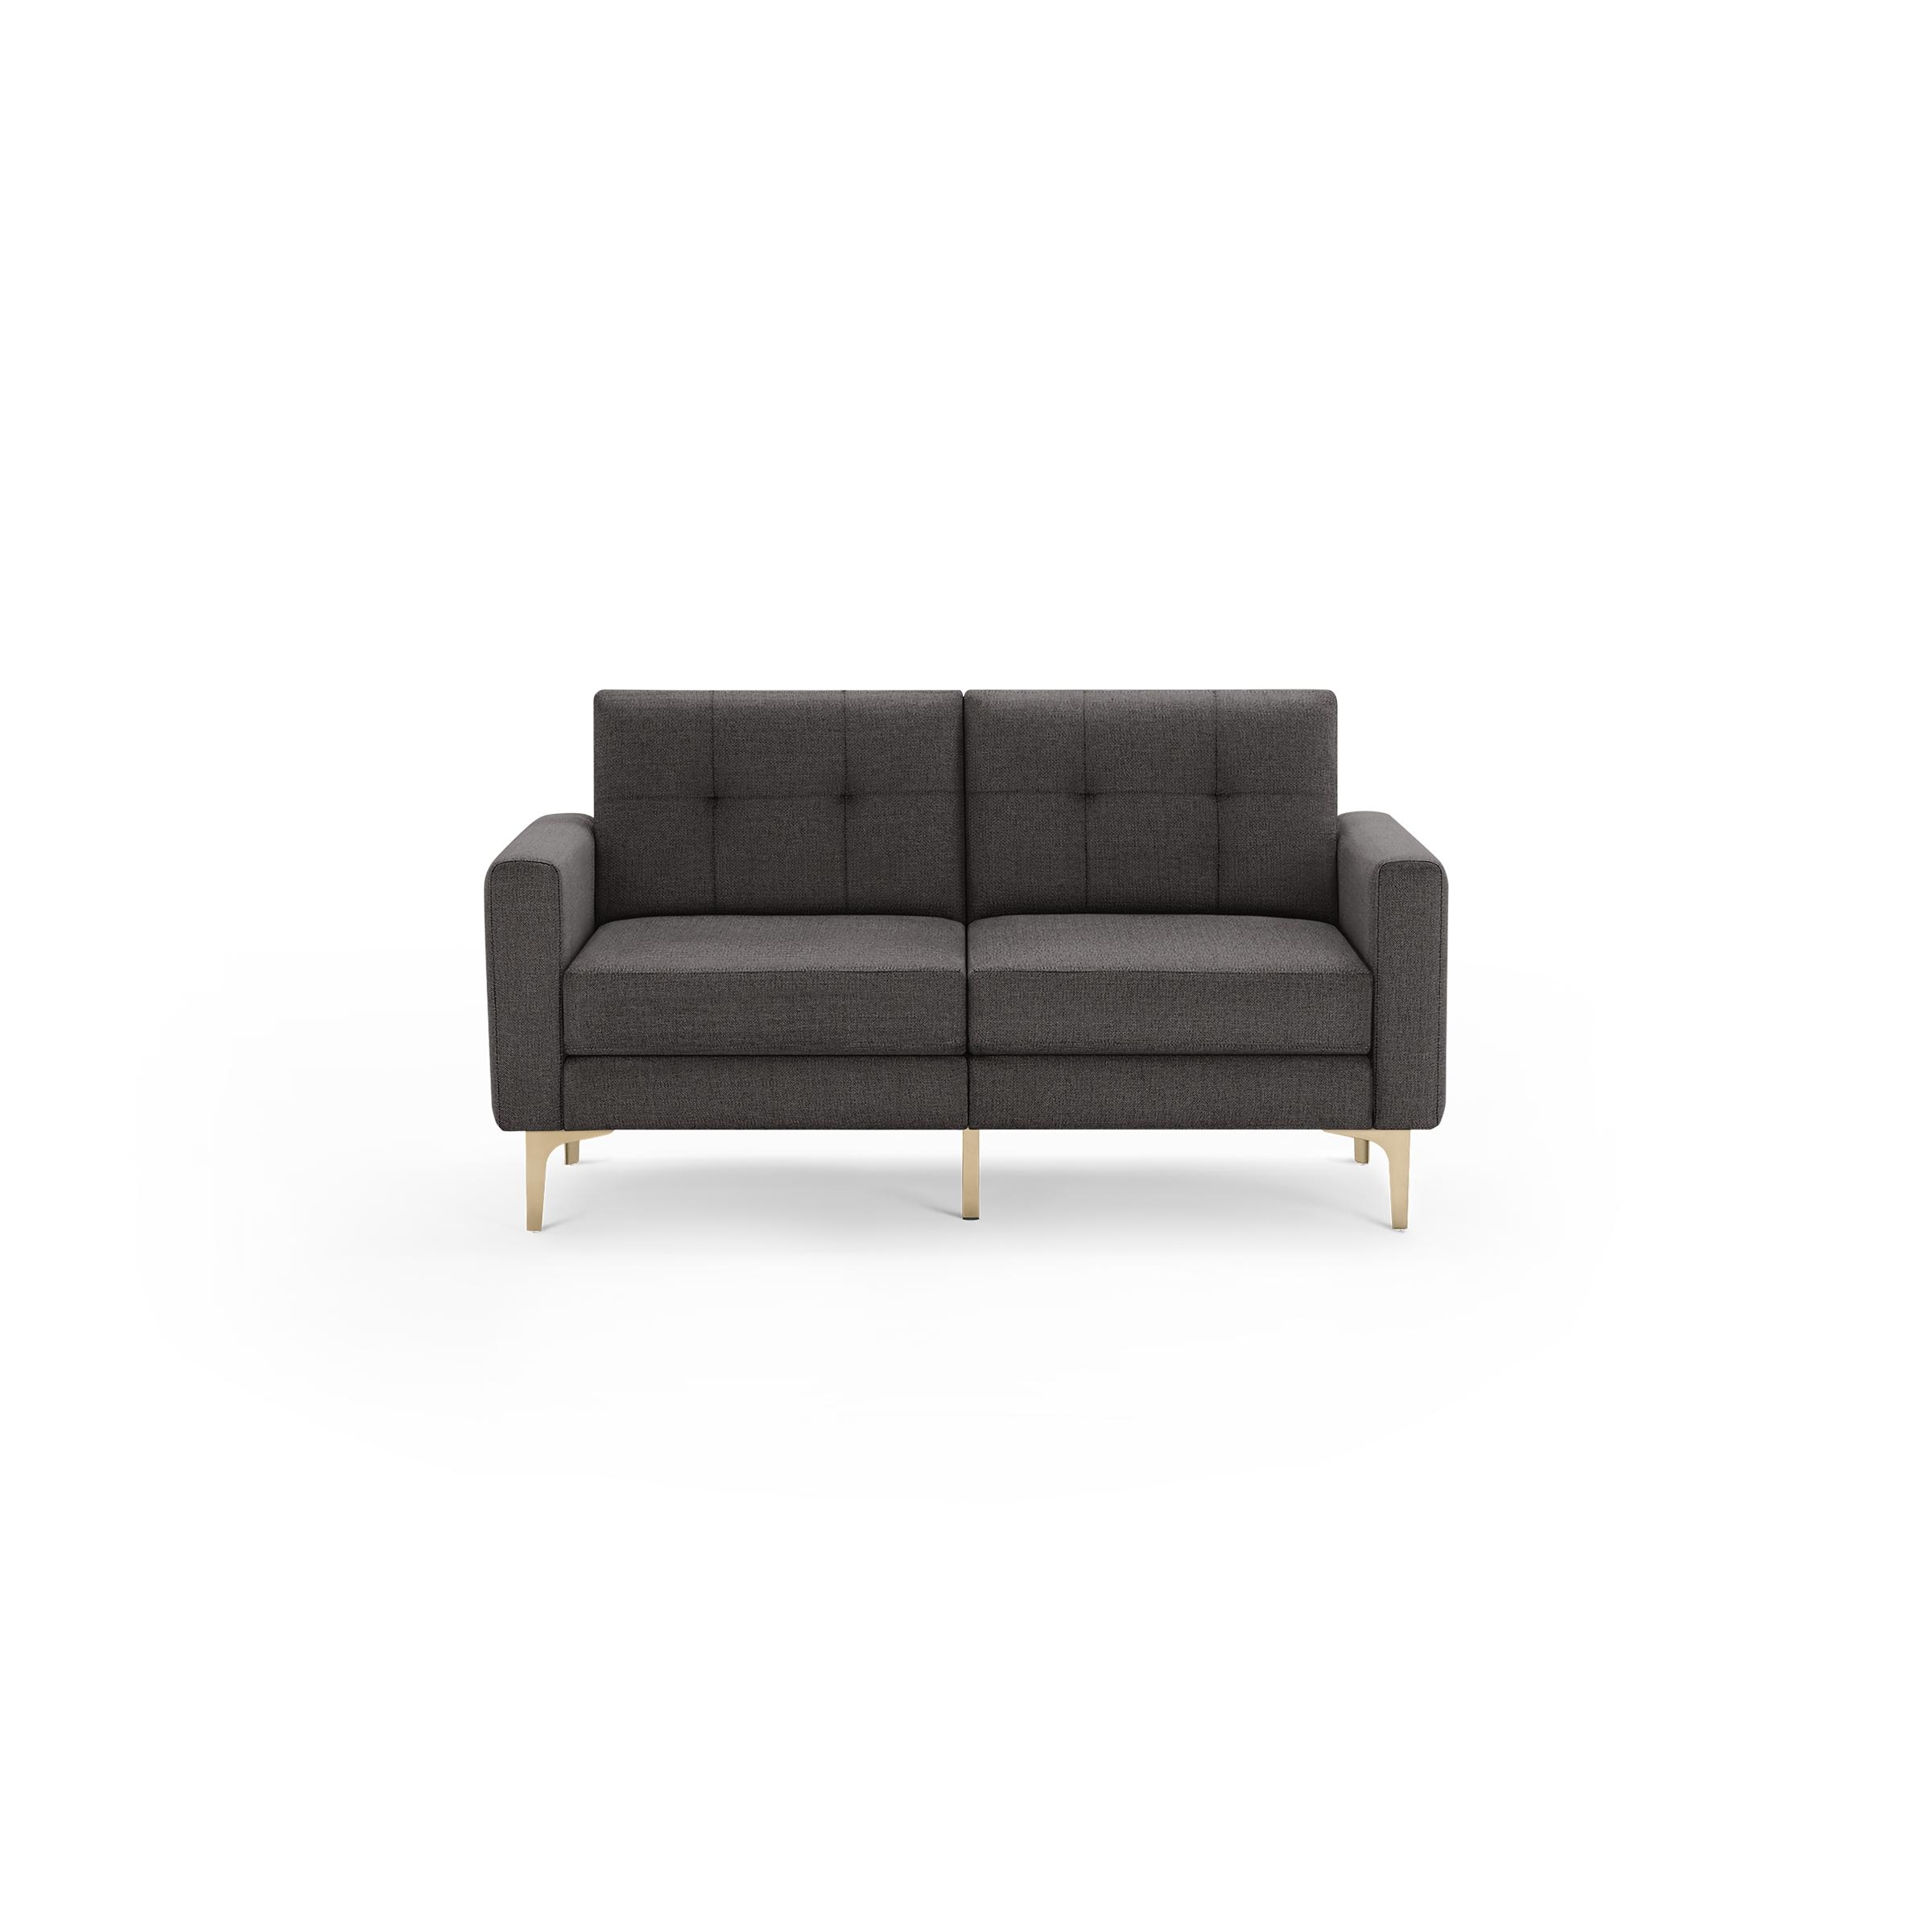 Nomad Loveseat in Charcoal, Brass Legs - Image 0